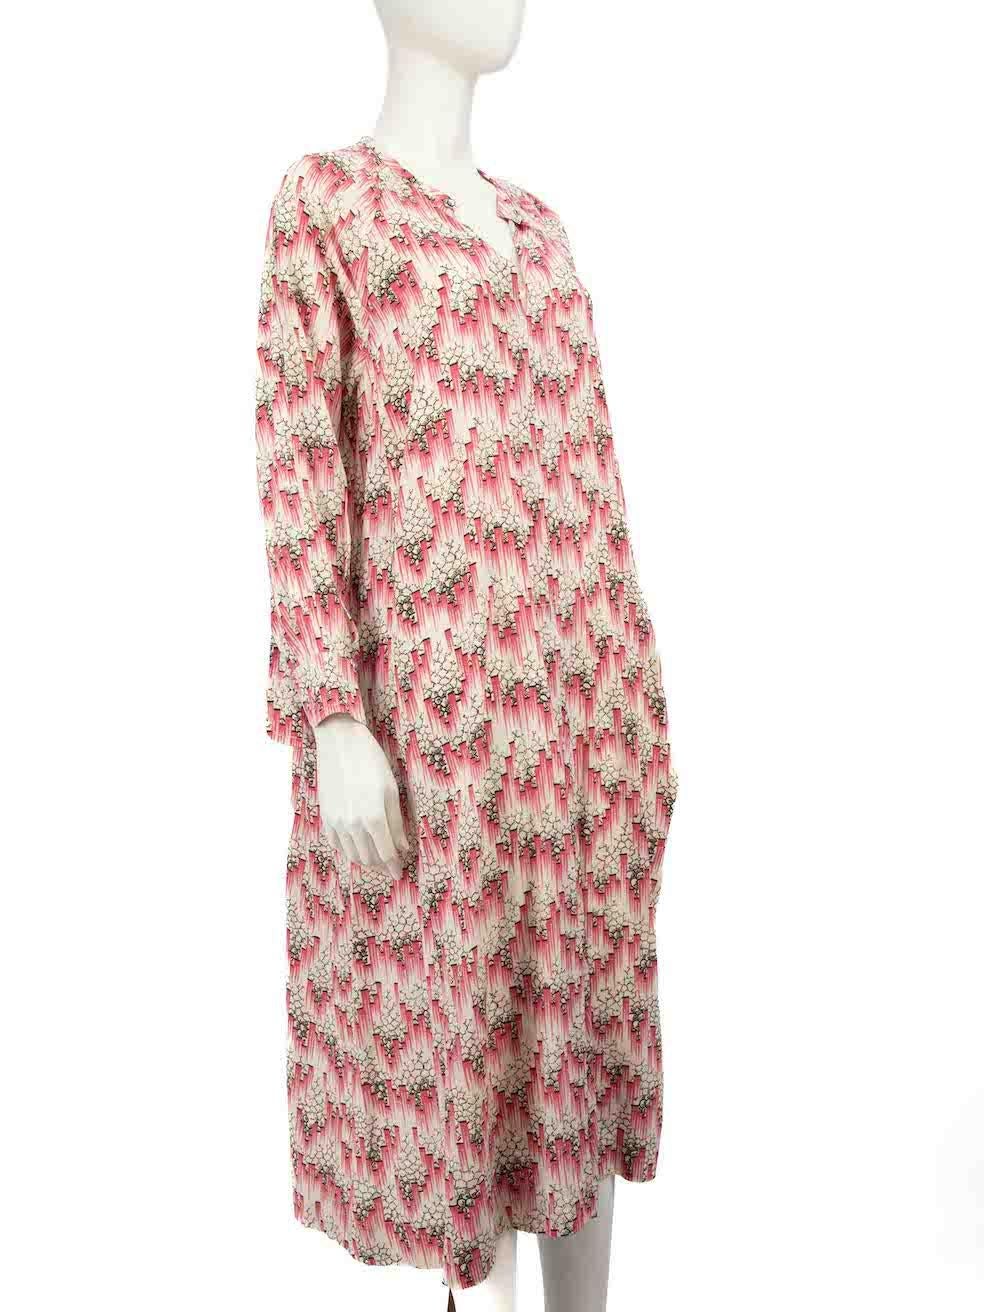 CONDITION is Very good. Hardly any visible wear to dress is evident on this used Isabel Marant designer resale item.
 
 
 
 Details
 
 
 Pink
 
 Silk
 
 Dress
 
 Abstract pattern
 
 V-neck
 
 Long sleeves
 
 Buttoned cuffs
 
 Midi
 
 2x Side